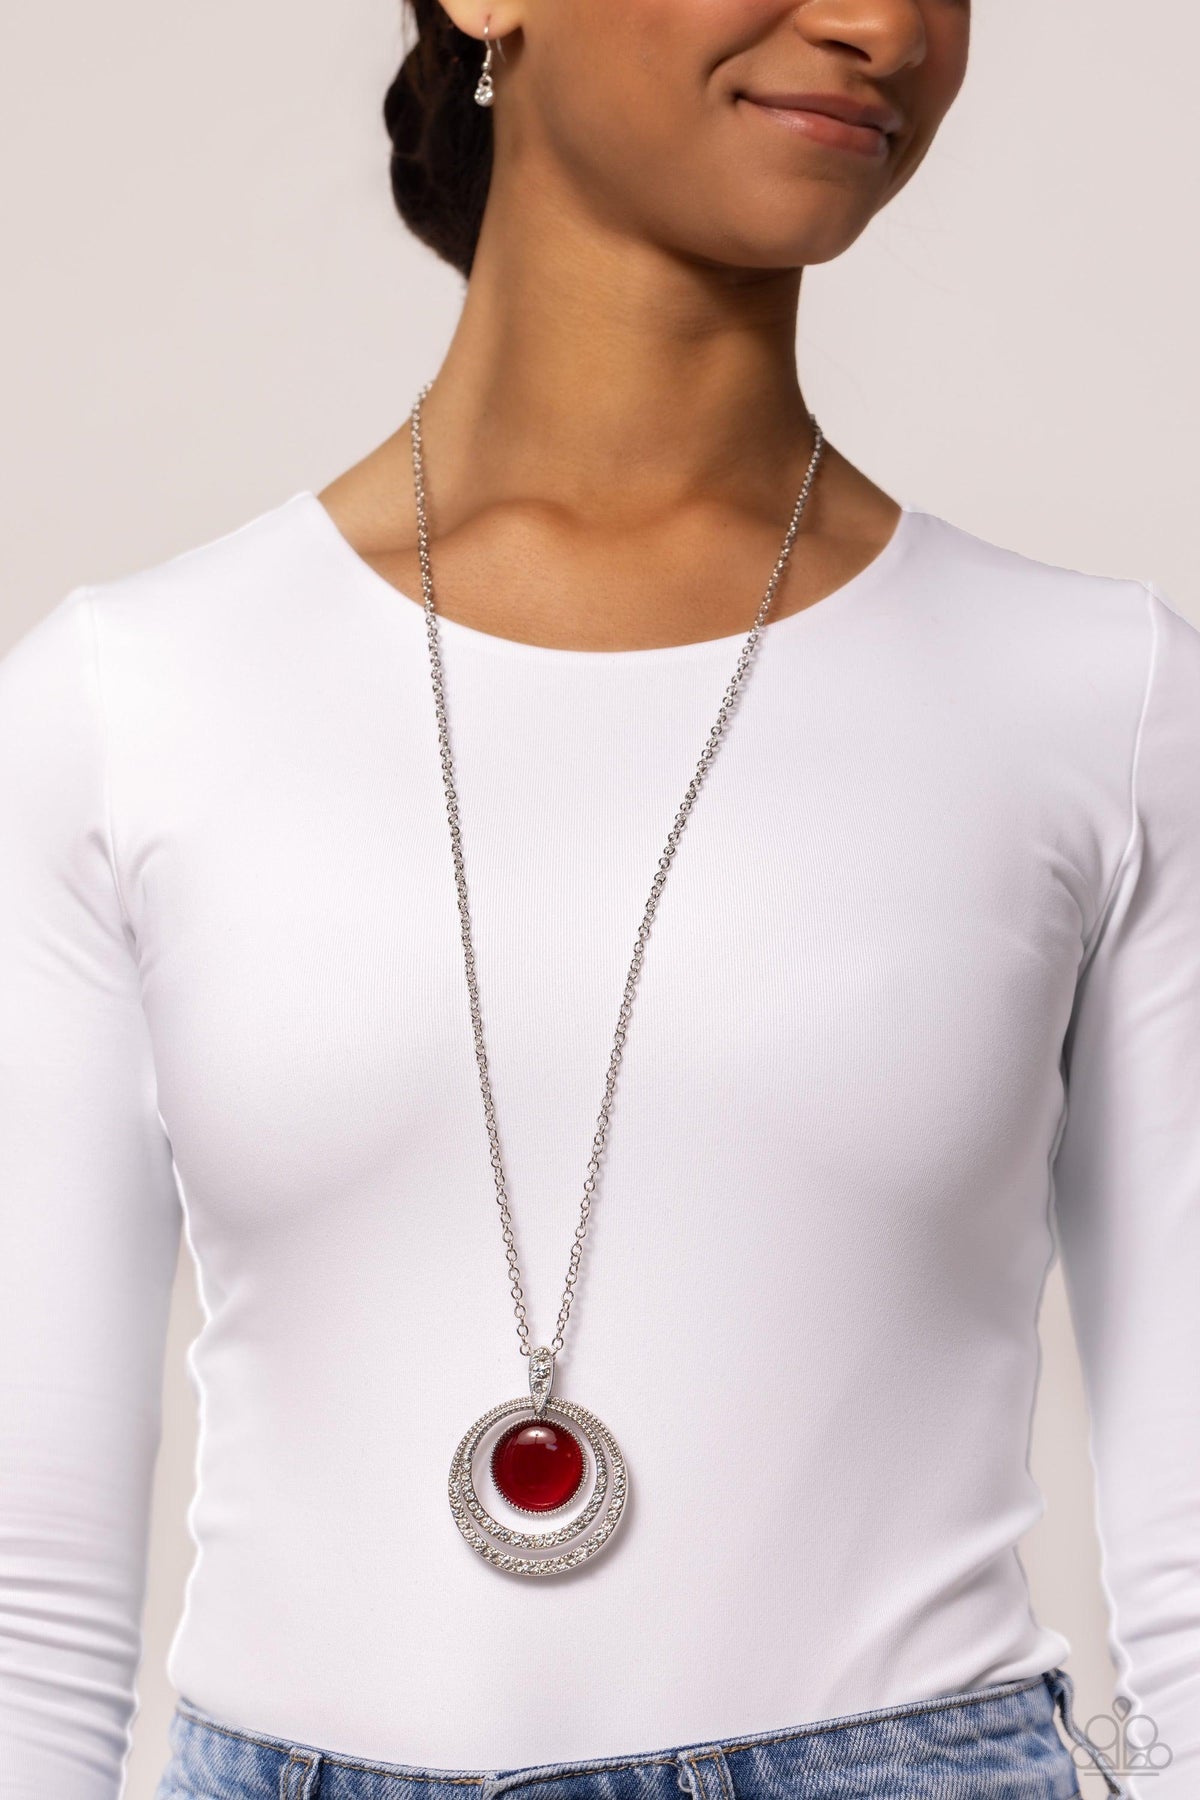 Cats Eye Couture Red Necklace - Paparazzi Accessories-on model - CarasShop.com - $5 Jewelry by Cara Jewels